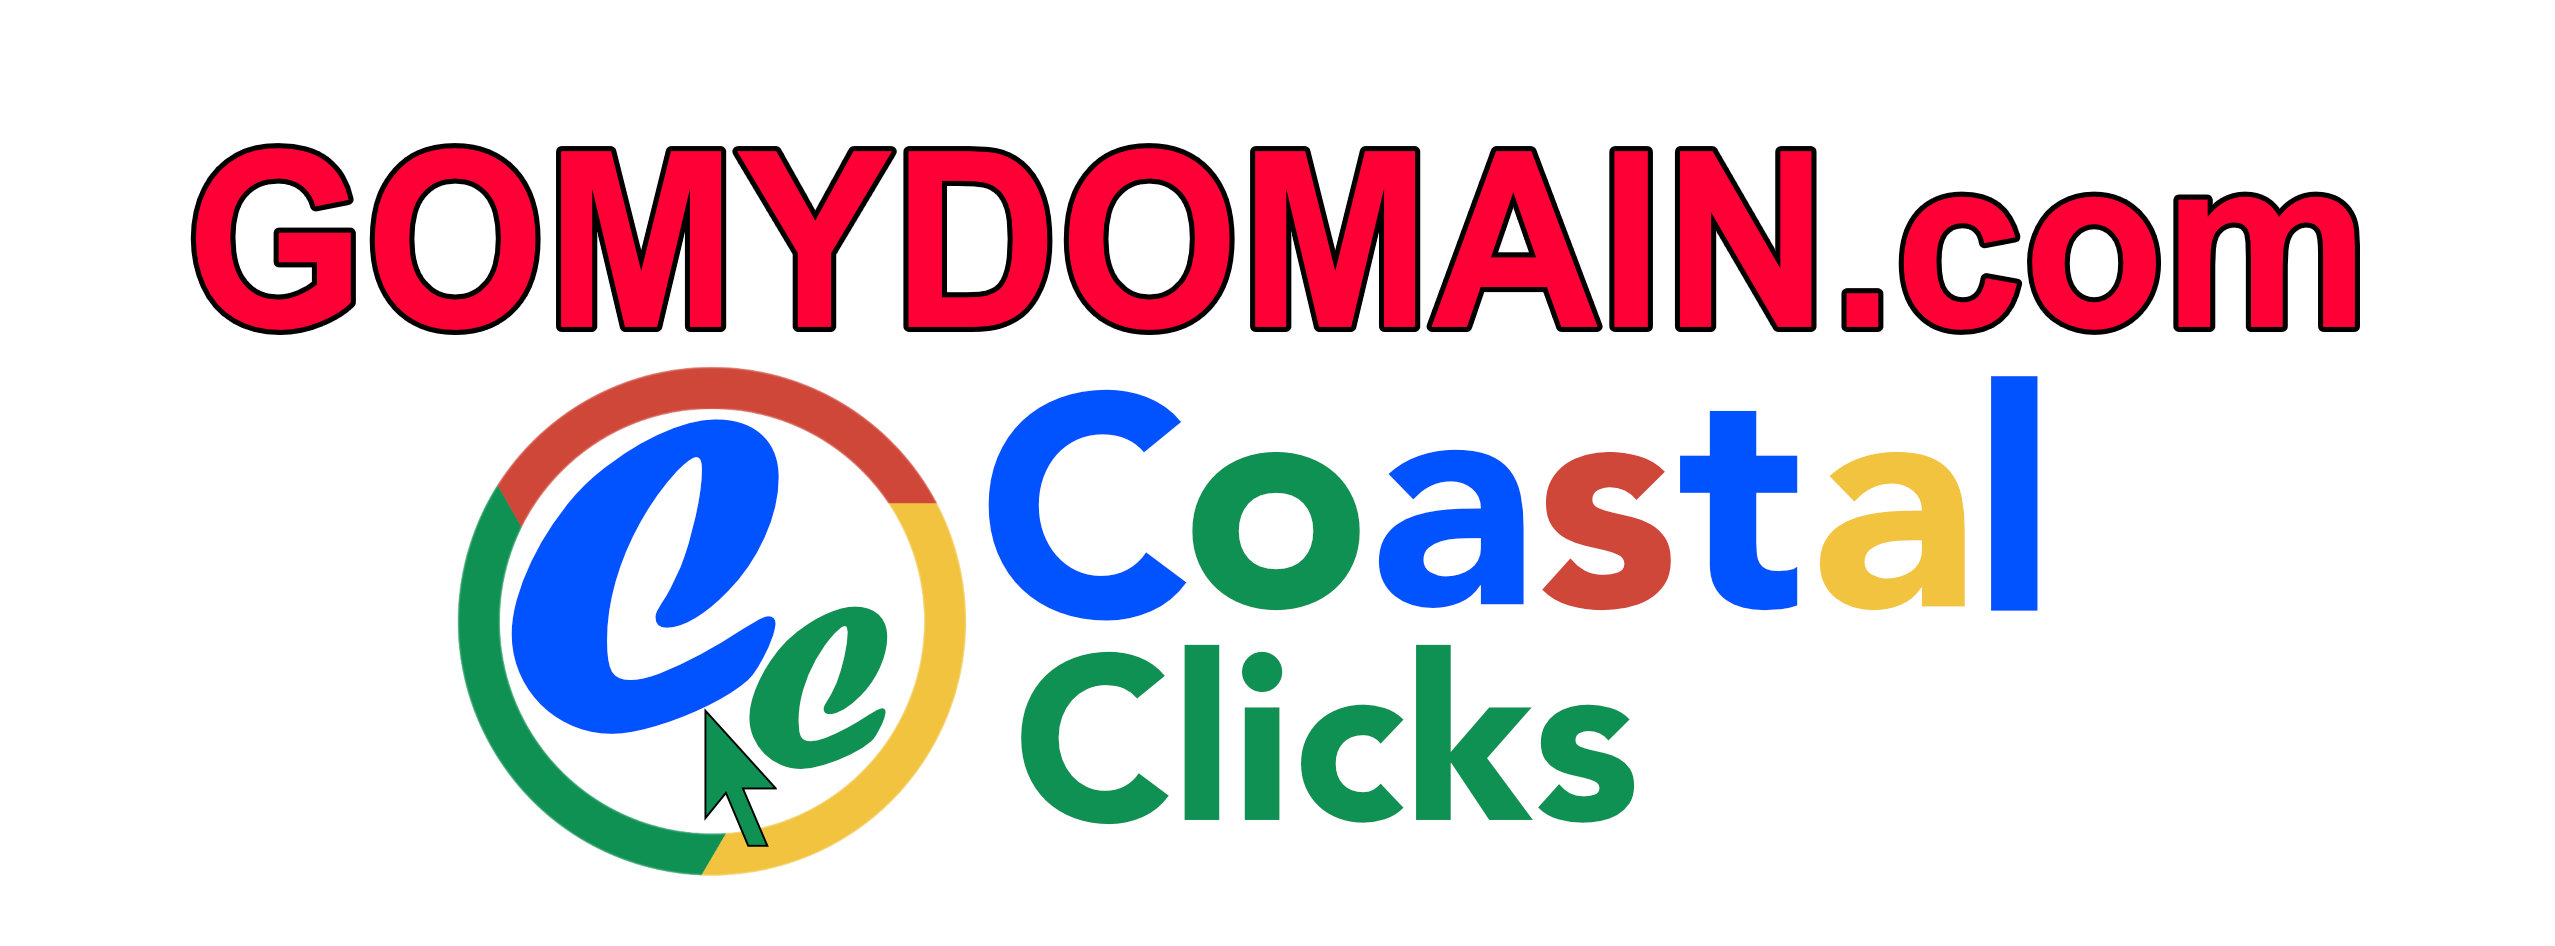 GoMyDomain.com Low Price Domains, Great USA Support